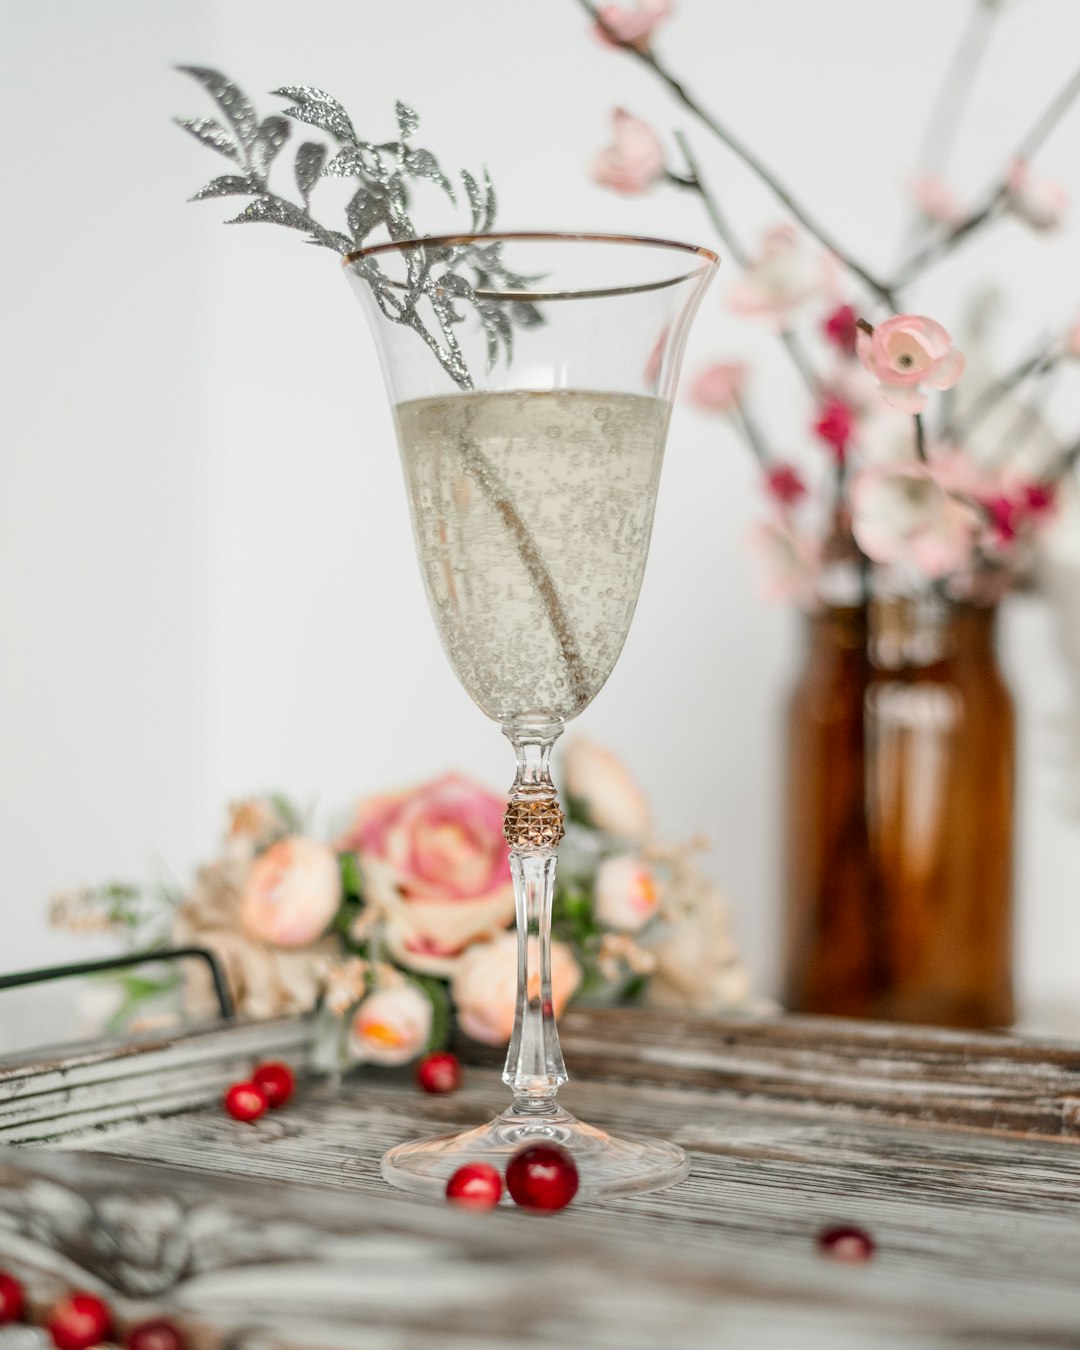 In celebration of the new year, I staged a cocktail photoshoot with multiple types of drinks, but this one with kombucha in place of champagne was my favorite. 